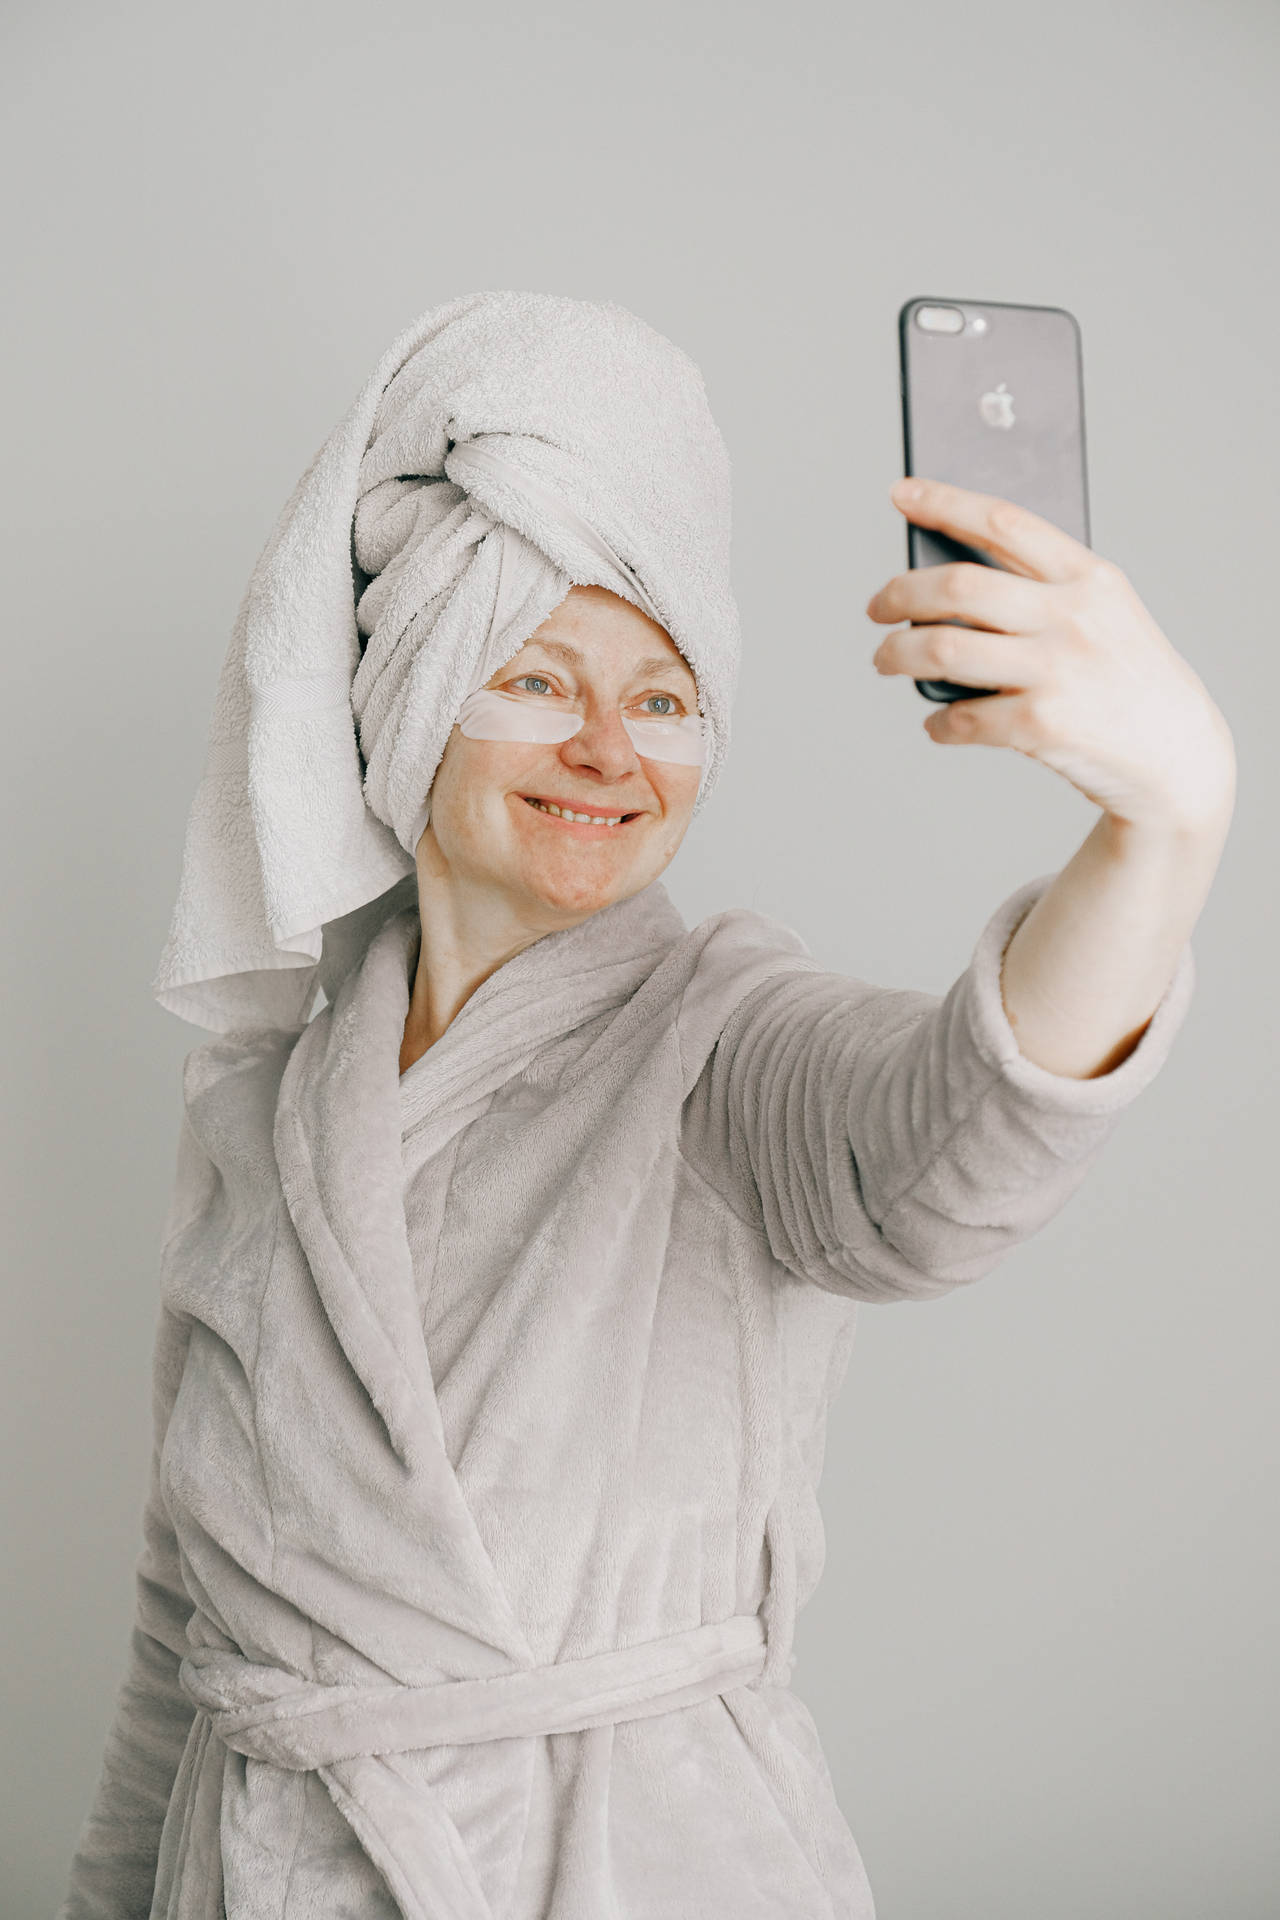 Mesmerizing Beauty Of Iphone After Shower Selfie